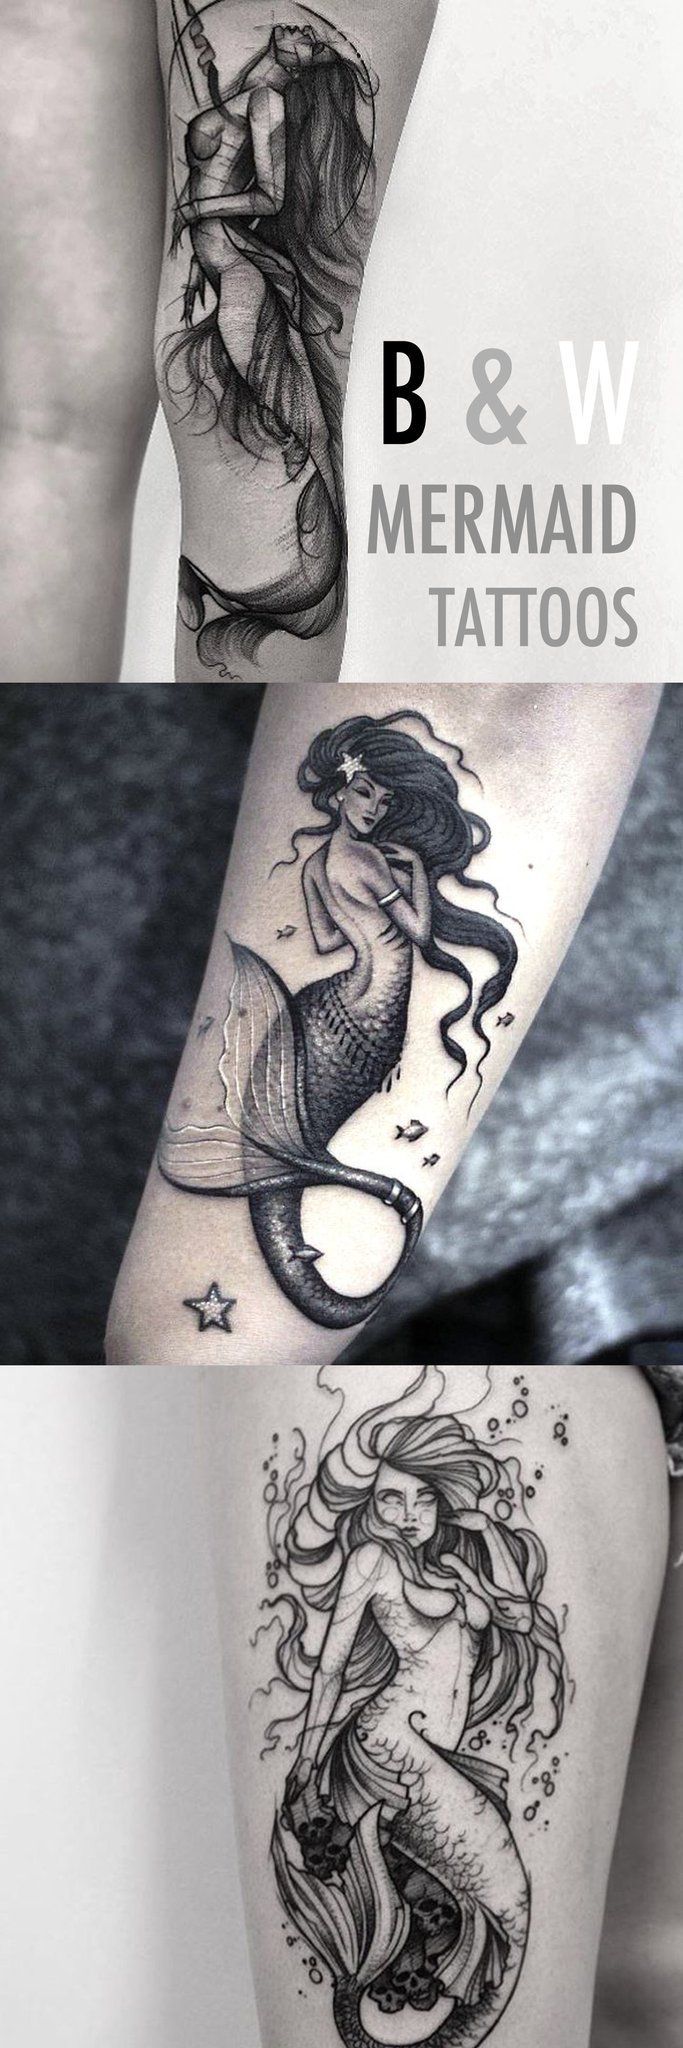 Steal The Most Wanted Mermaid Tattoo Ideas Tattoos For Women pertaining to dimensions 683 X 2048